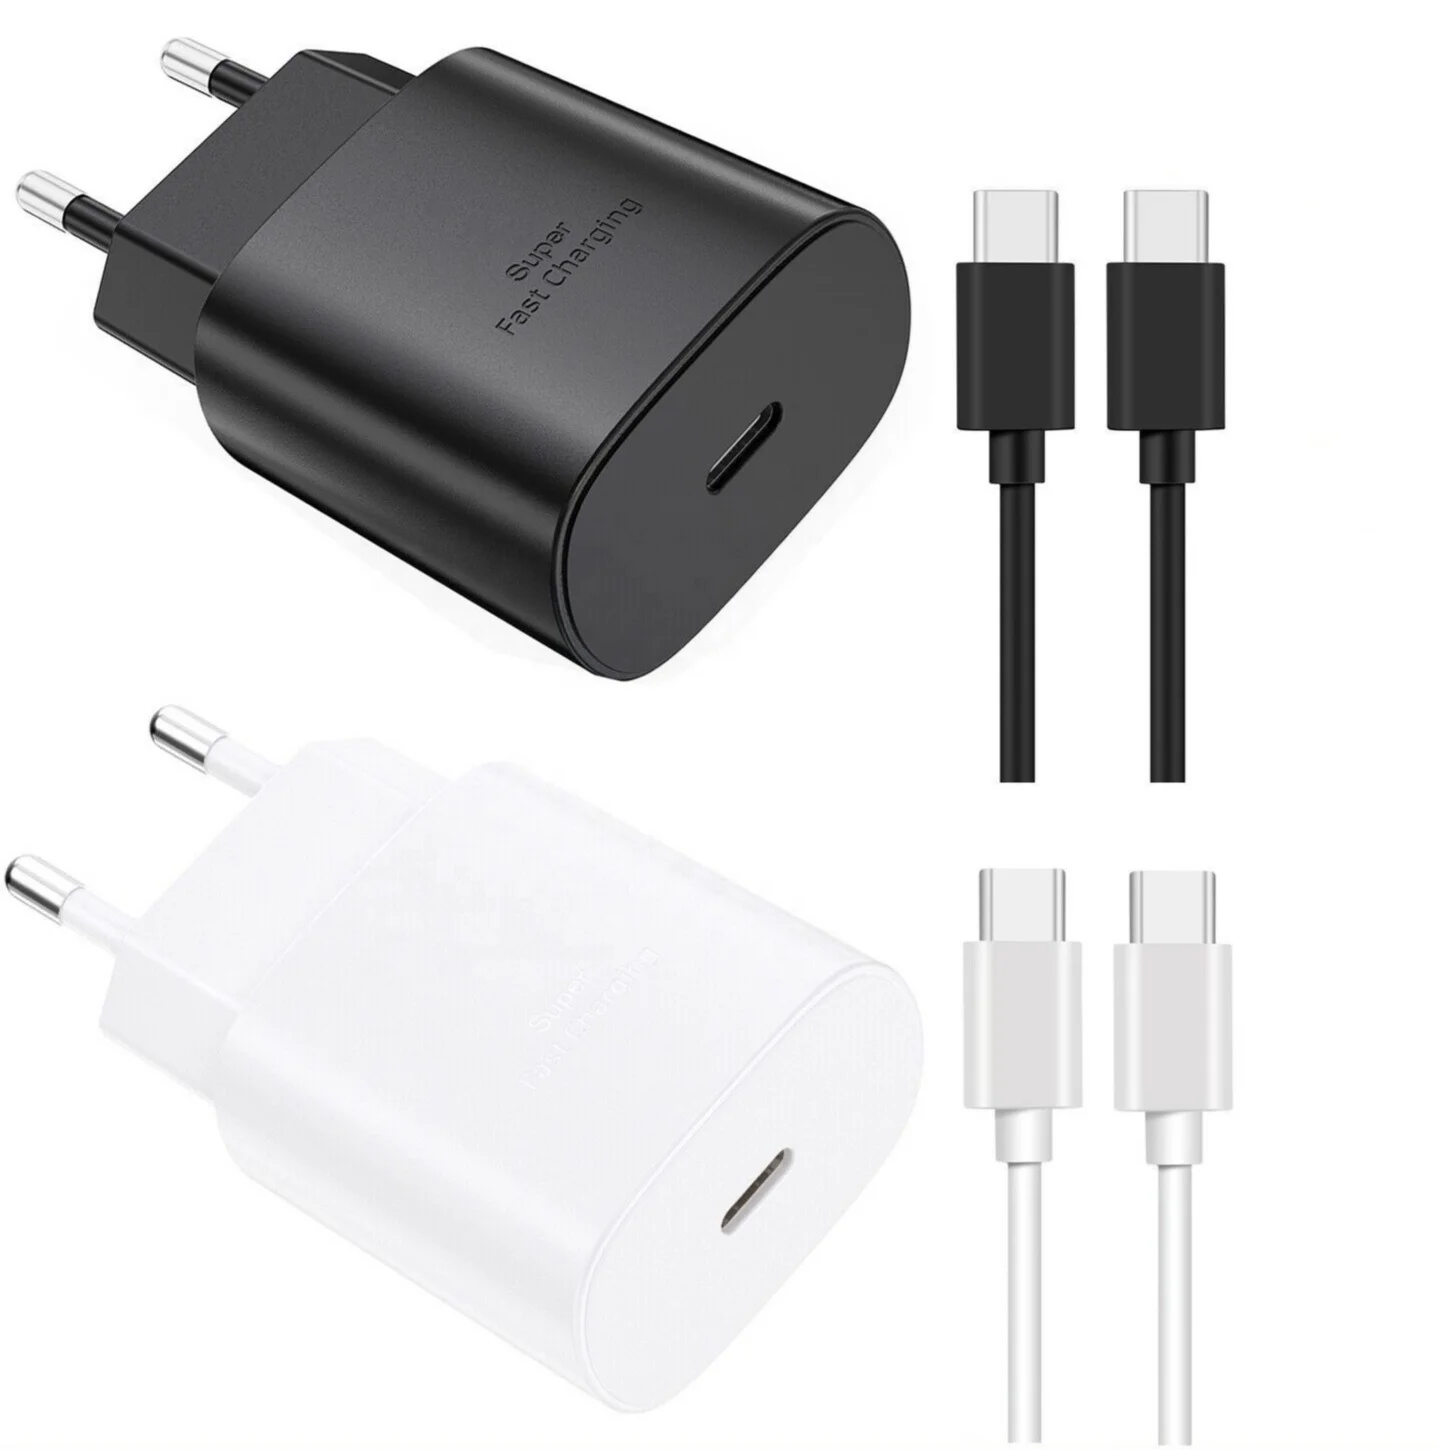 

USB C fast Charger 25W PD Wall Power Adapter for Samsung Galaxy S20/S21/S21+/S21Ultra/S10, Black white